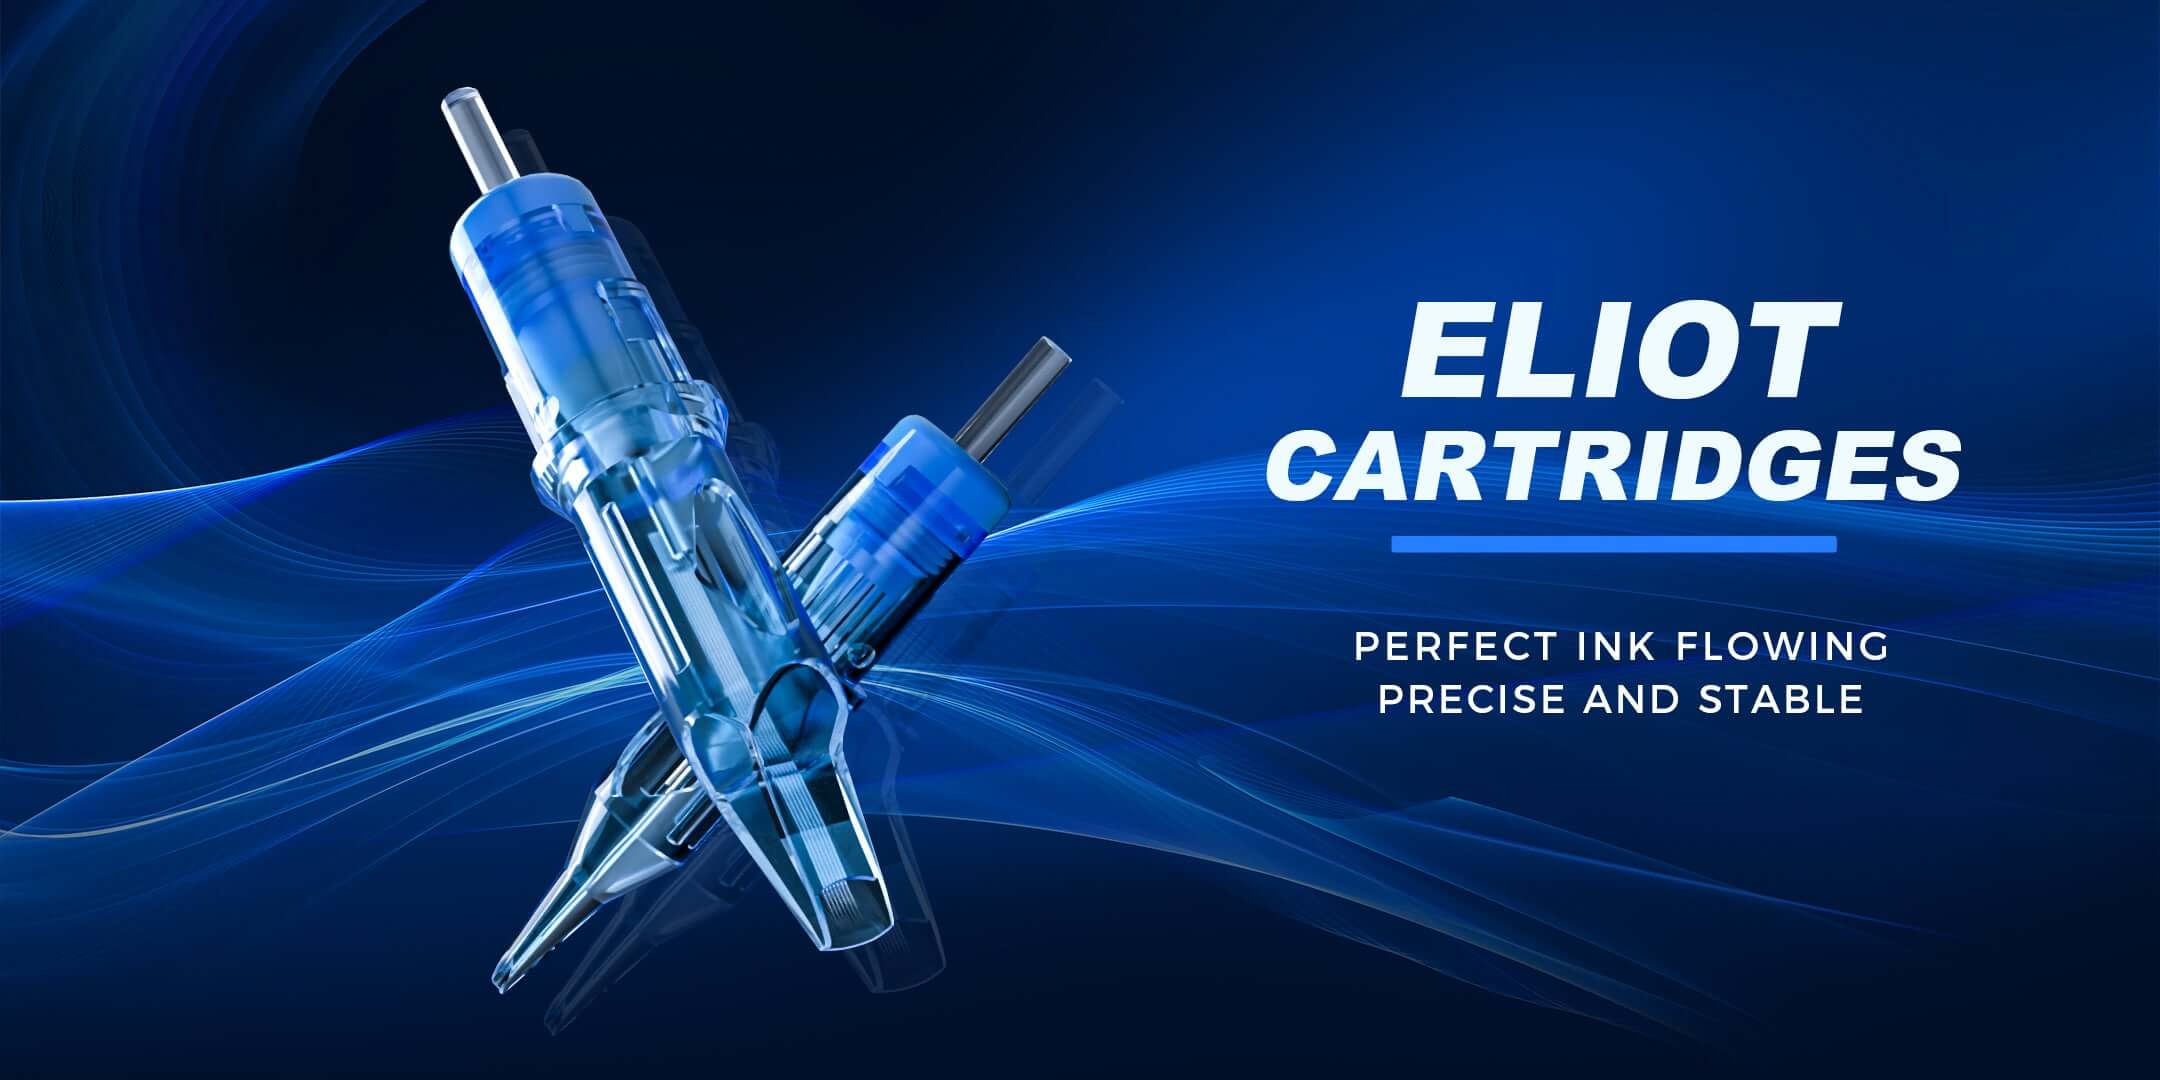 Emalla Eliot Cartridge Needles with perfect ink flowing are precise and stable